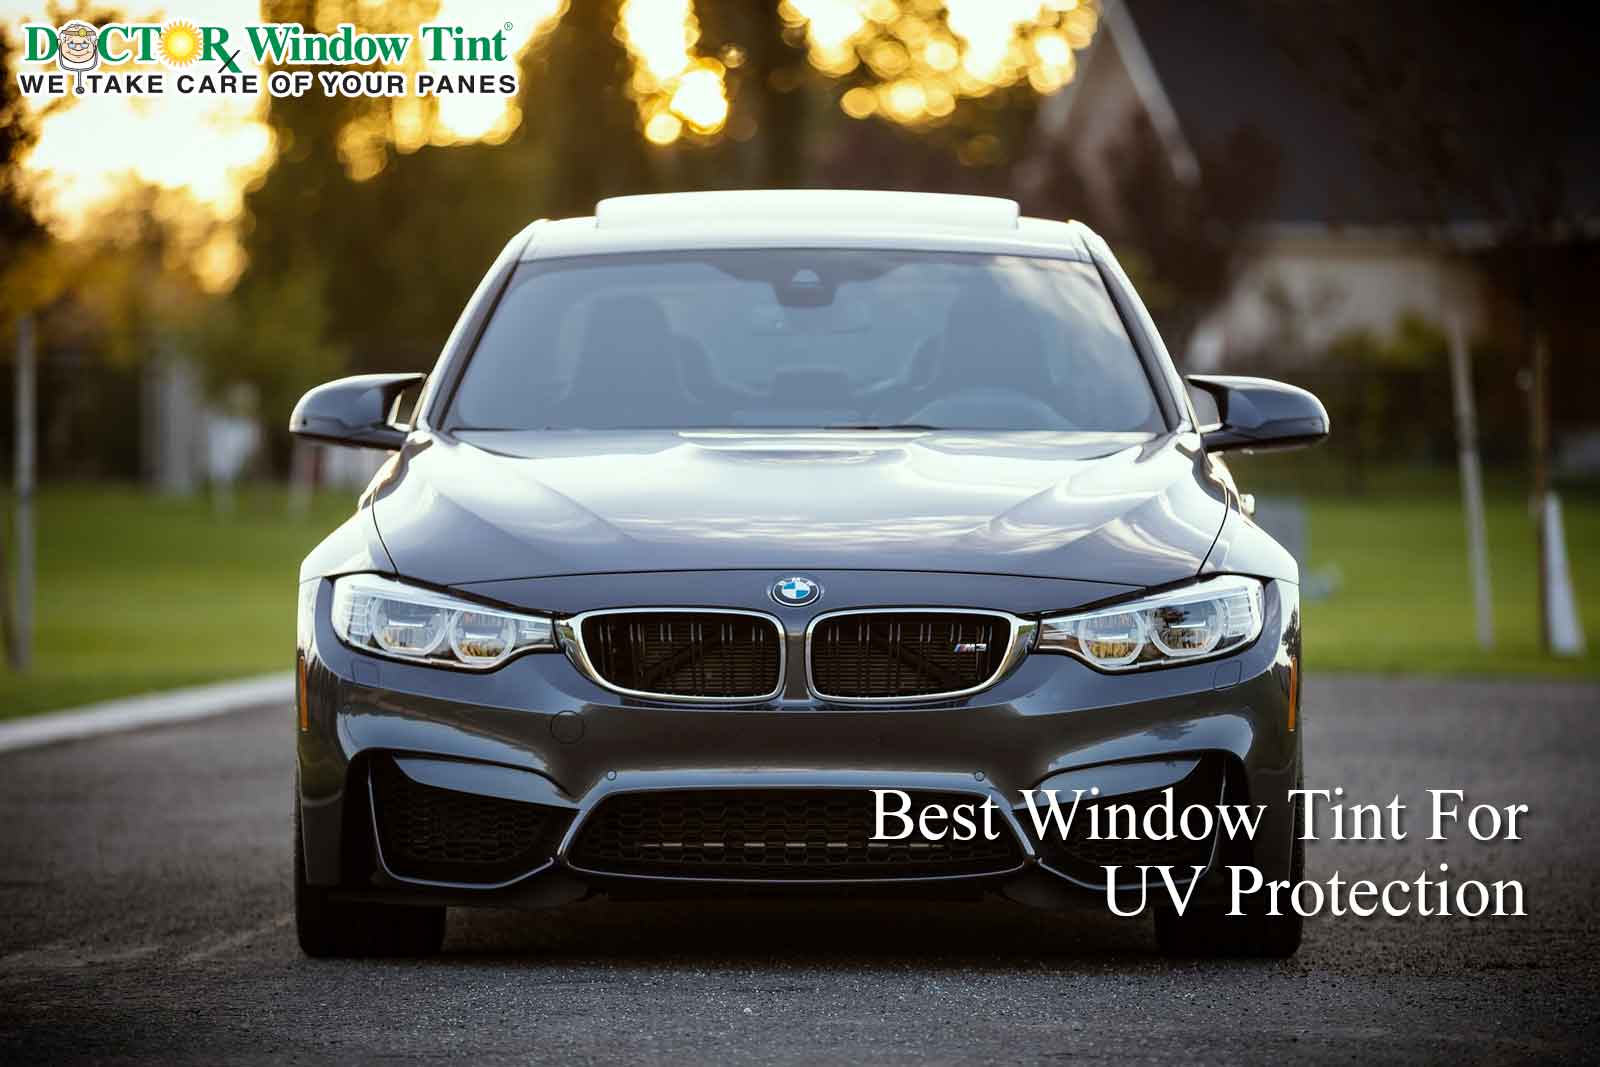 Choosing The Best Window Tint For UV Protection